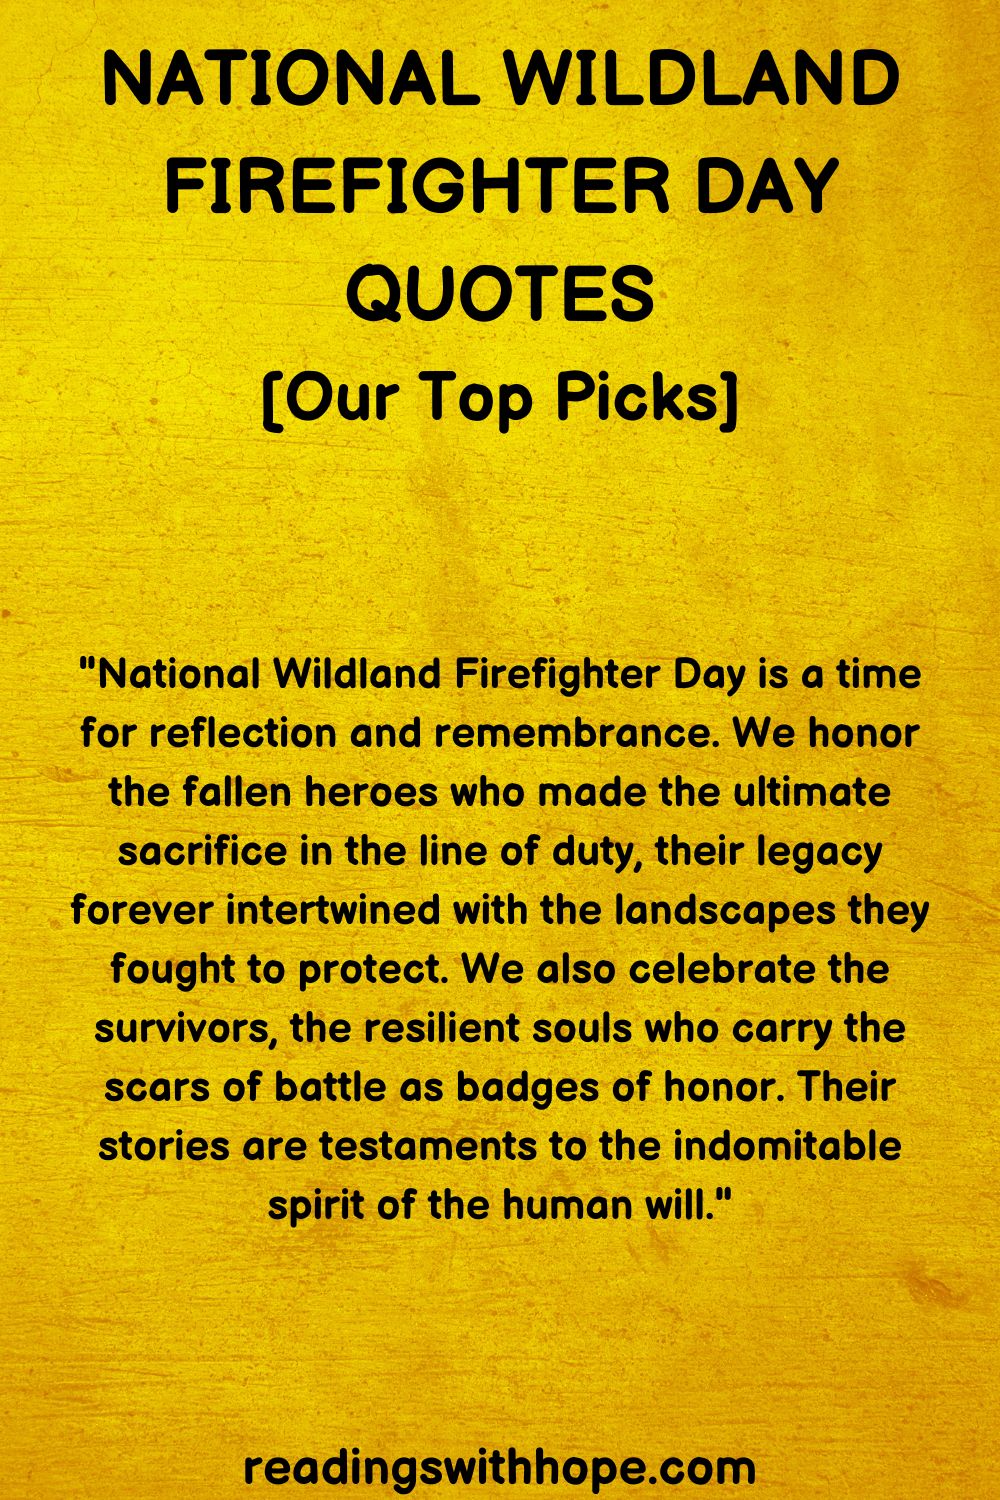 30 National Wildland Firefighter Day Quotes